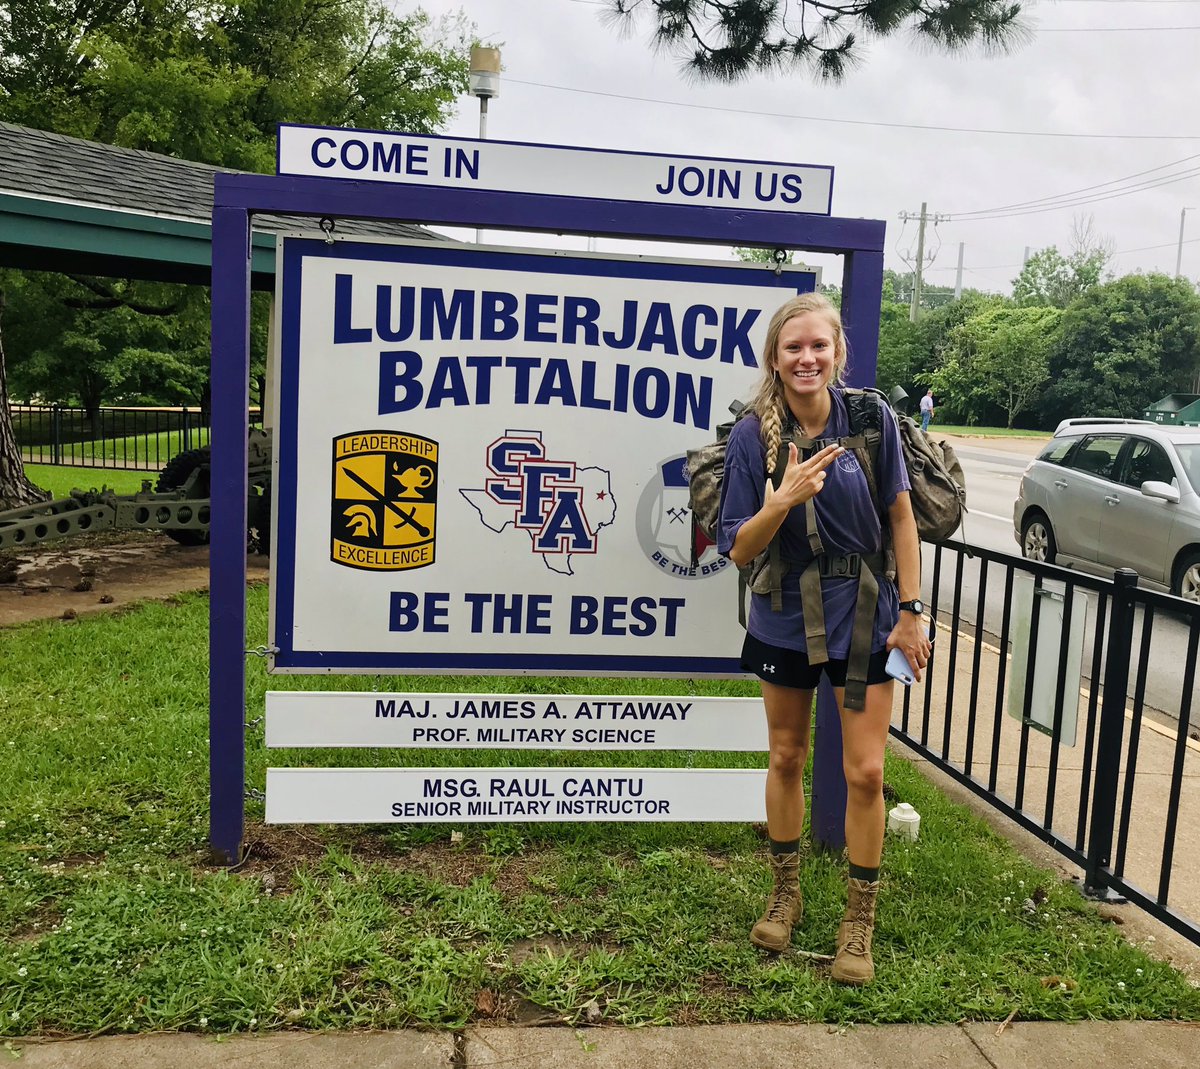 In preparation for Cadet Summer Training (CST) Cadet Sam Stalnaker just crushed her make up 10 mile road march!  After CST,  Sam will attend Nurse Summer Training Program at Fort Bragg, NC and work side by side with practicing Army Nurses.  #armynurse #Sfa23 #sfa22 #sfasu